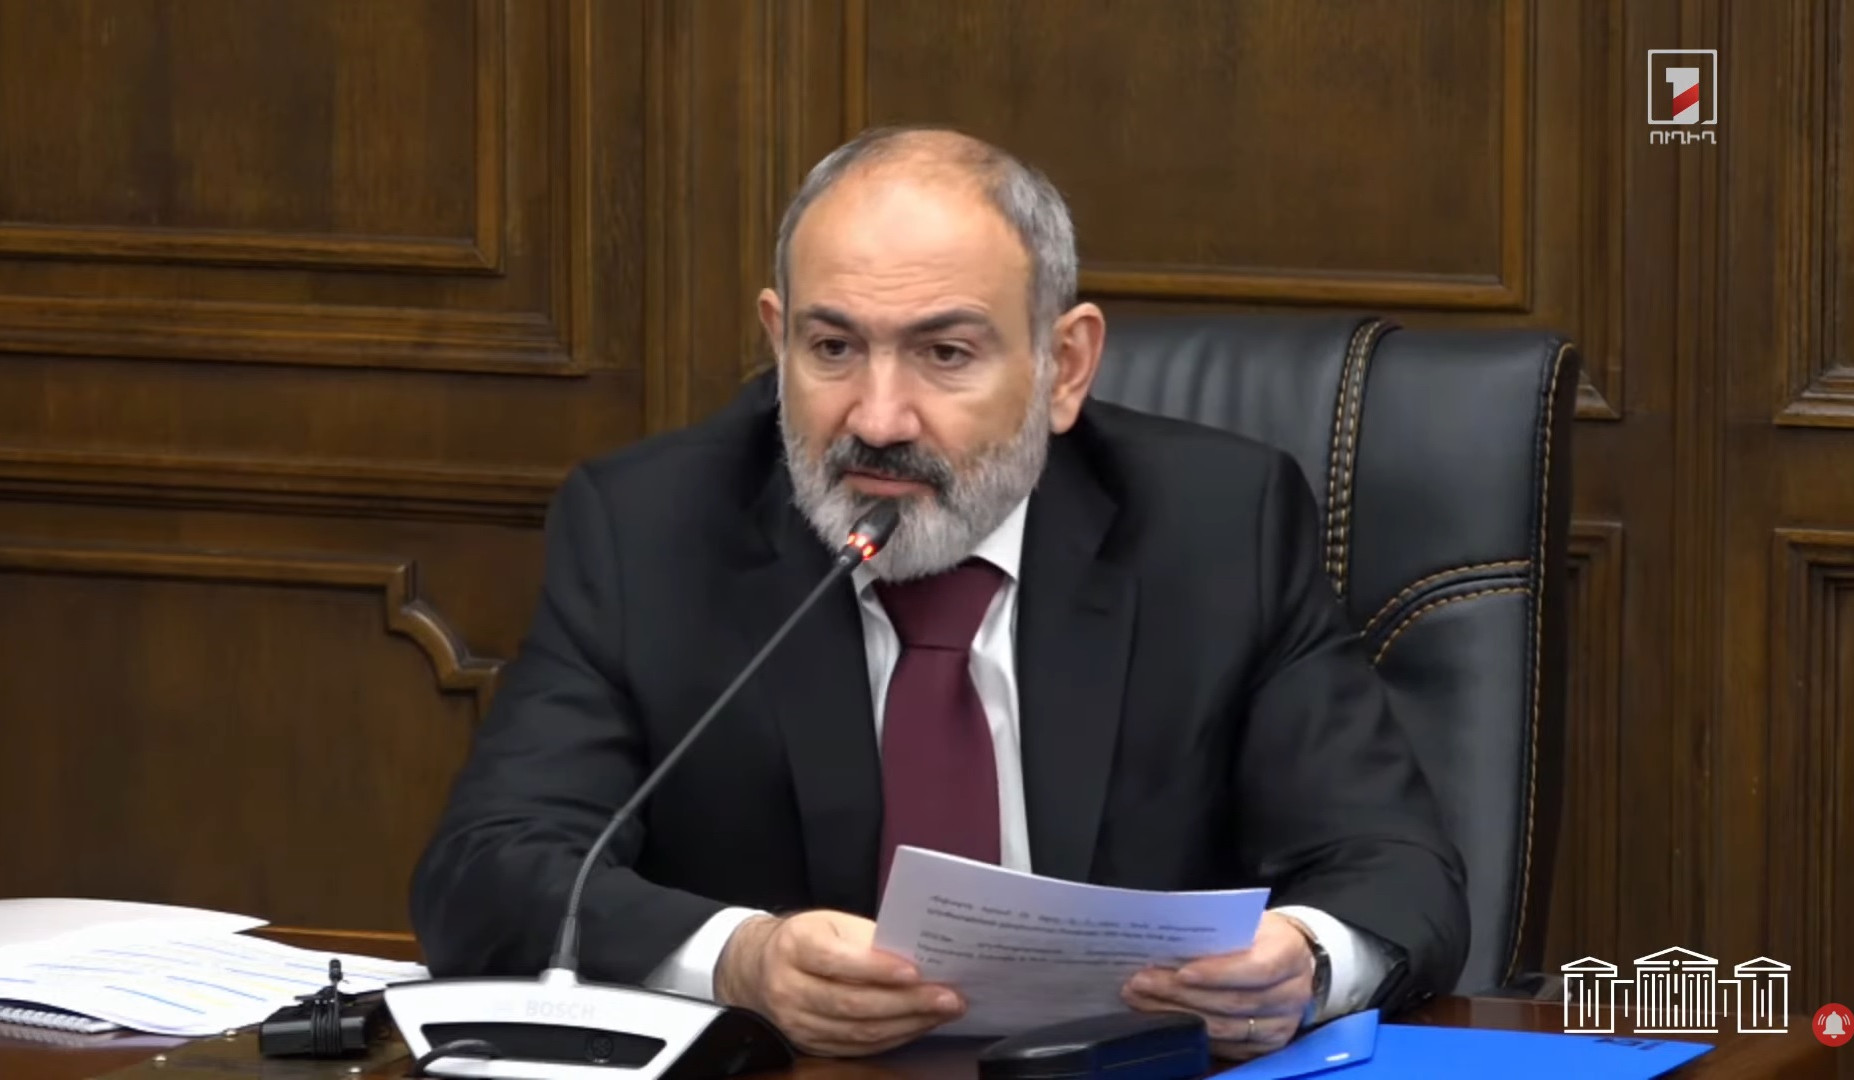 Since revolution, more than 200 thousand new jobs created in Armenia: Pashinyan